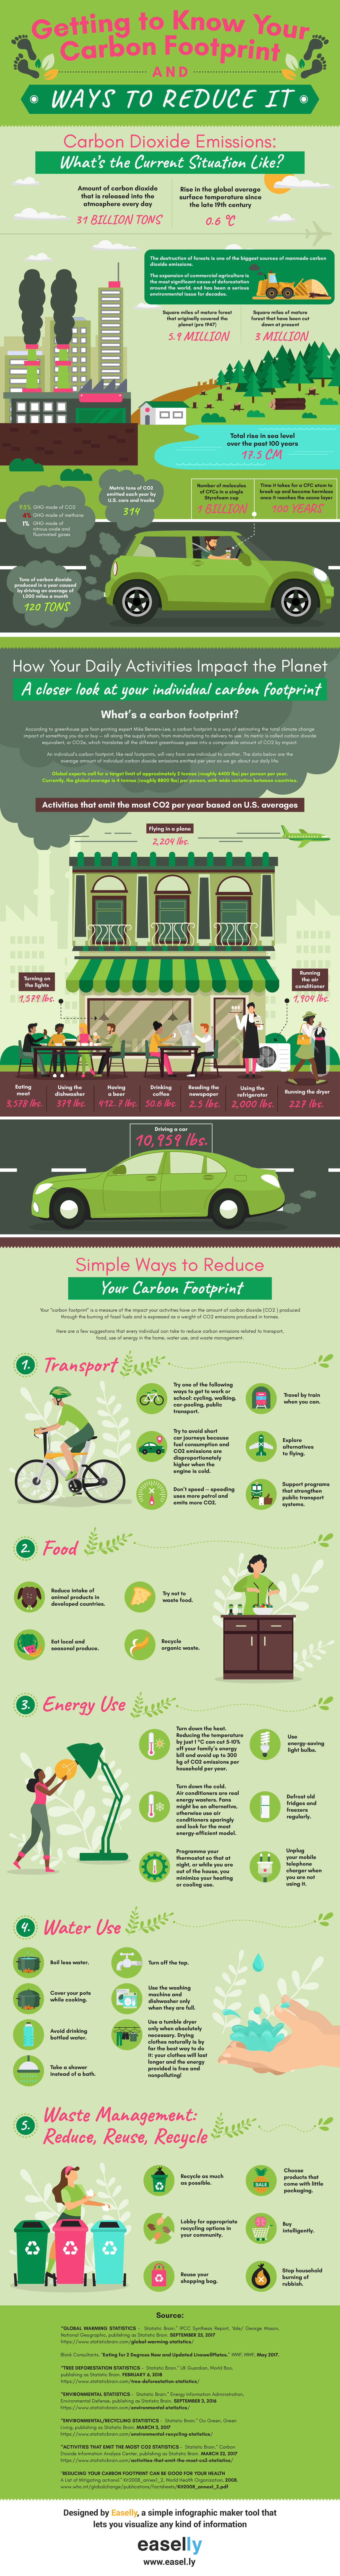 getting to know your carbon footprint and ways to reduce it infographic